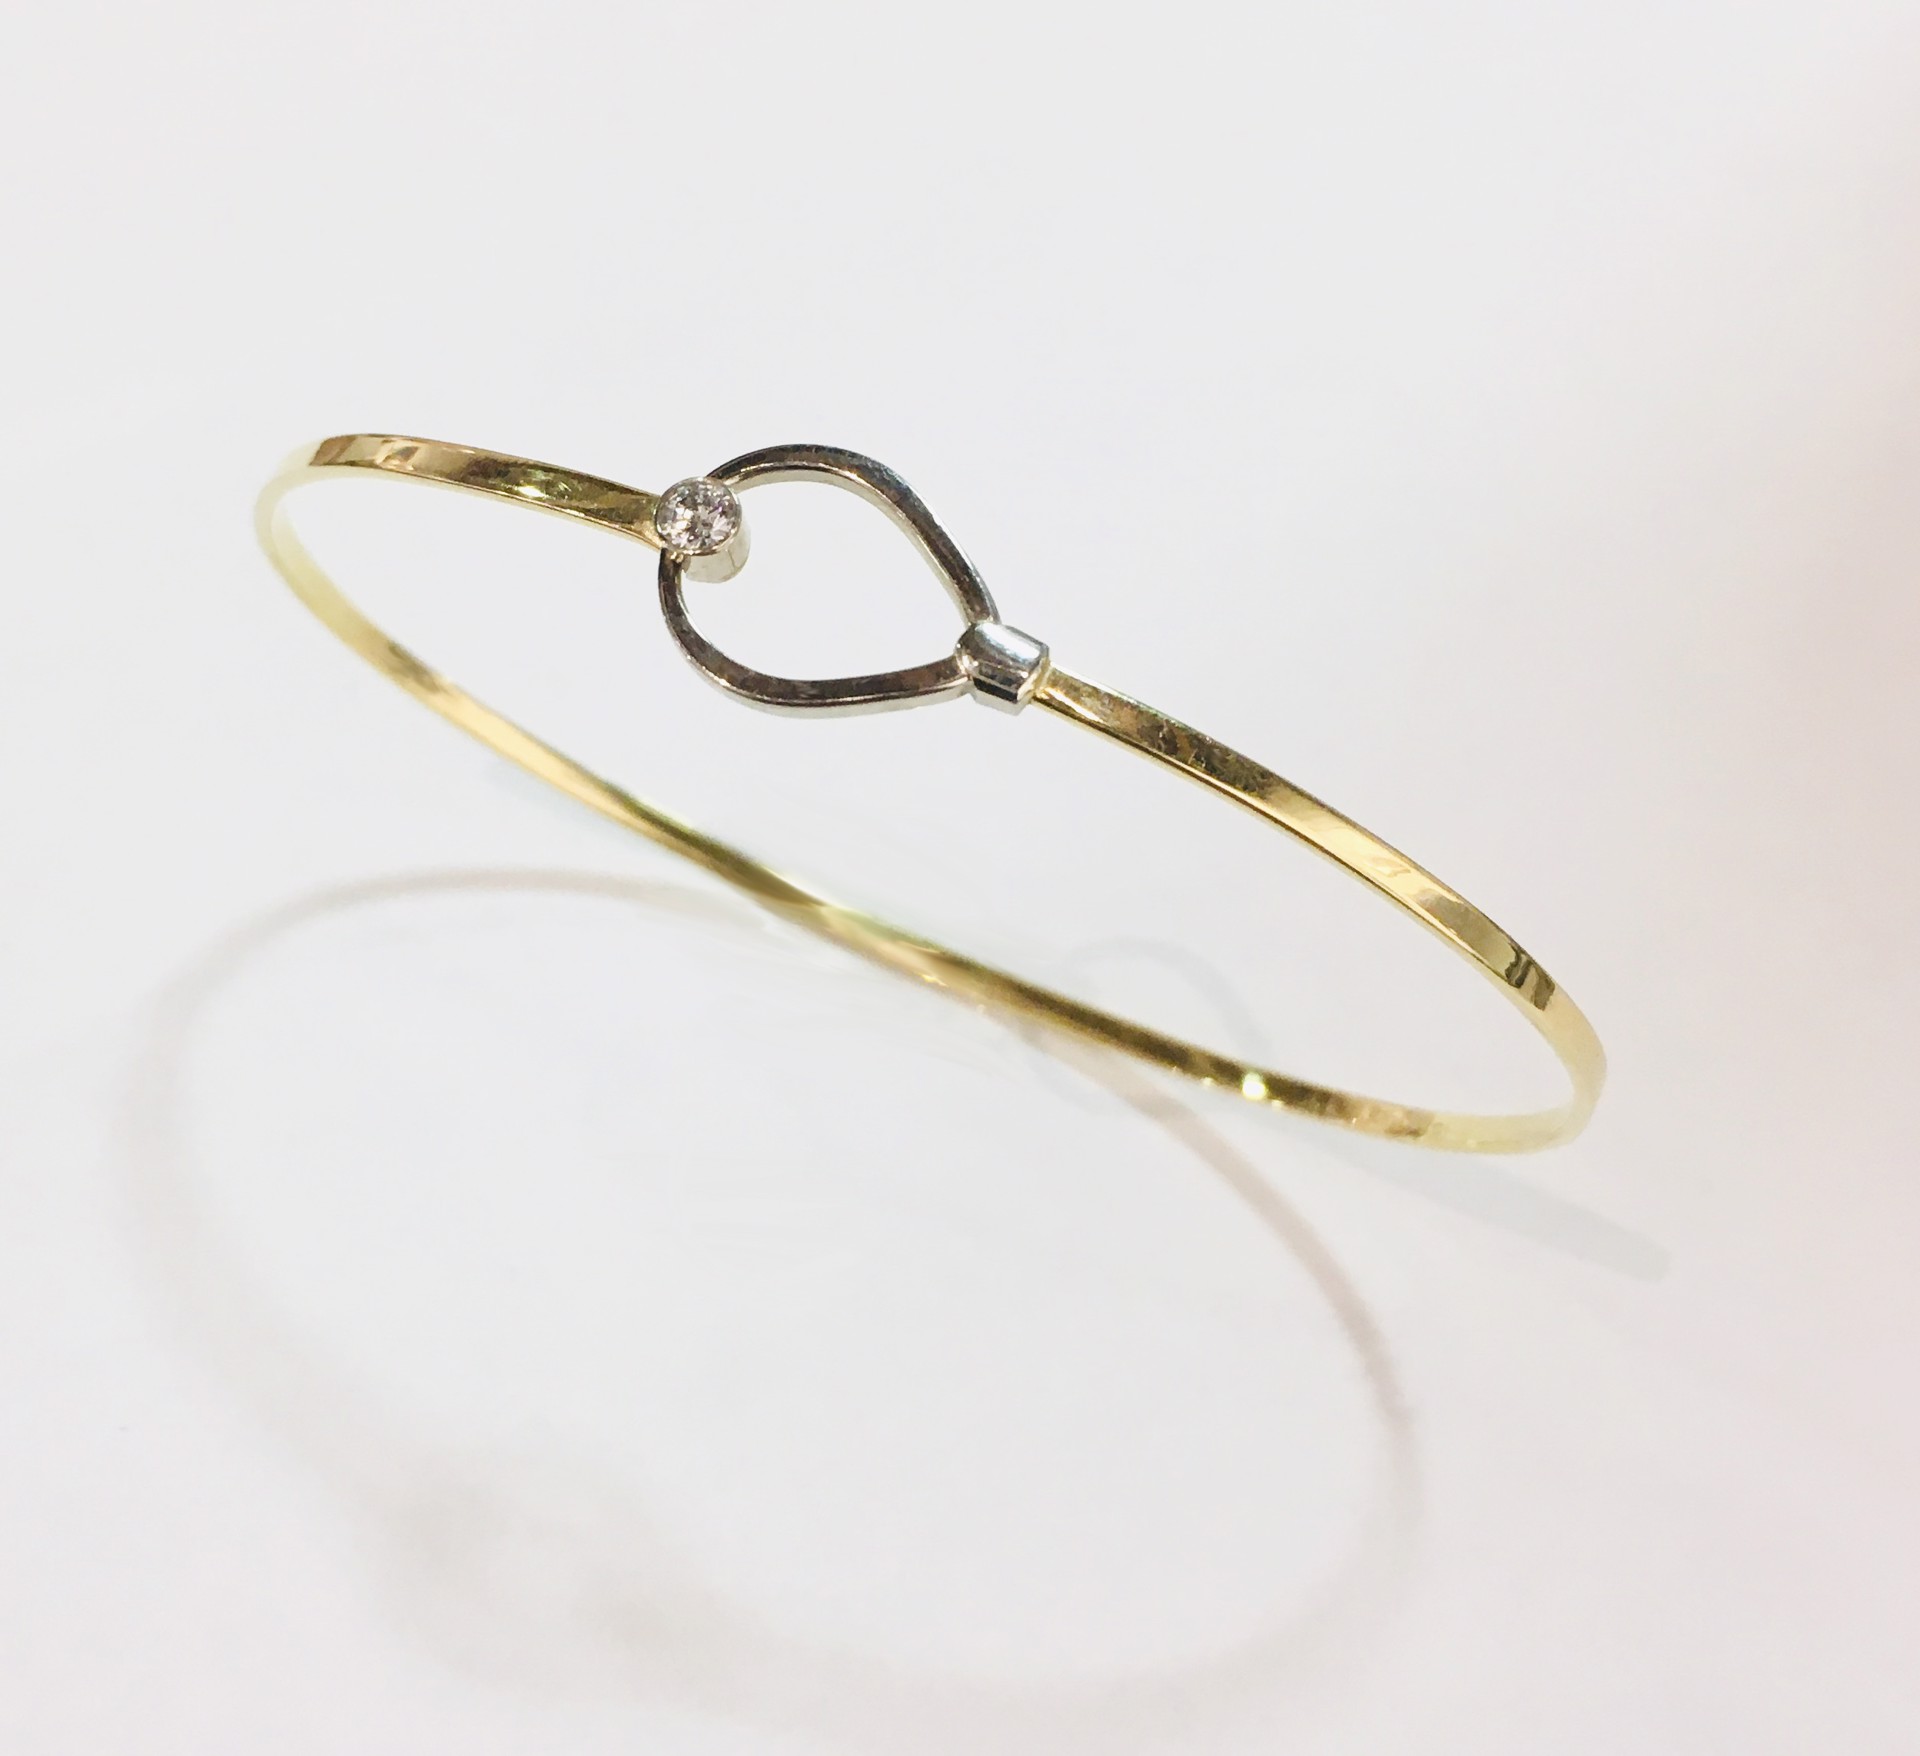 Two Tone Bracelet with Loop Clasp by D'ETTE DELFORGE